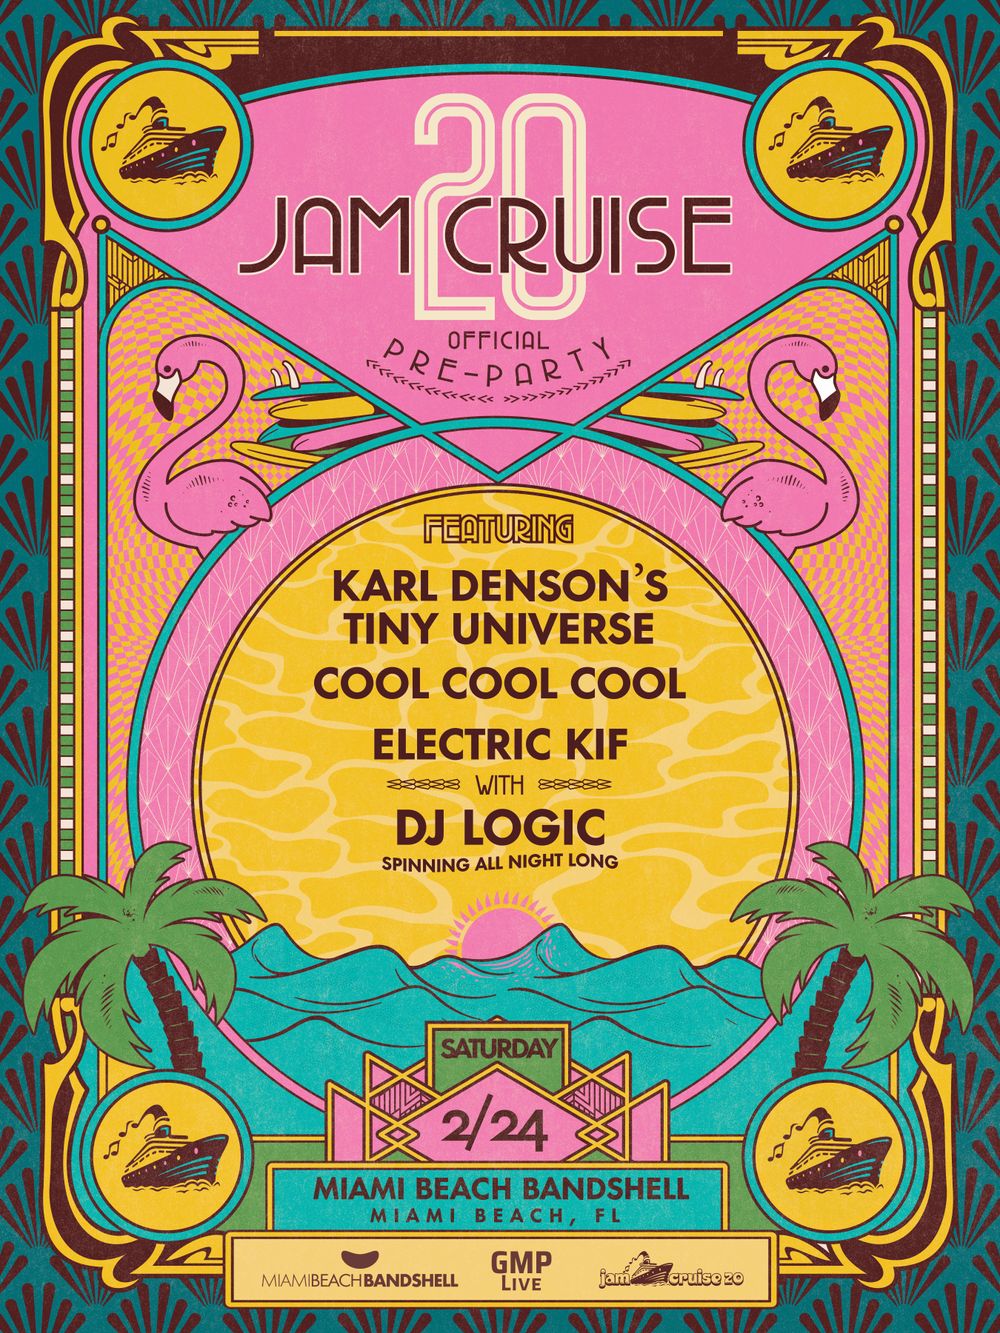 Cool Cool Cool - Jam Cruise Pre-Party February 24th 2024